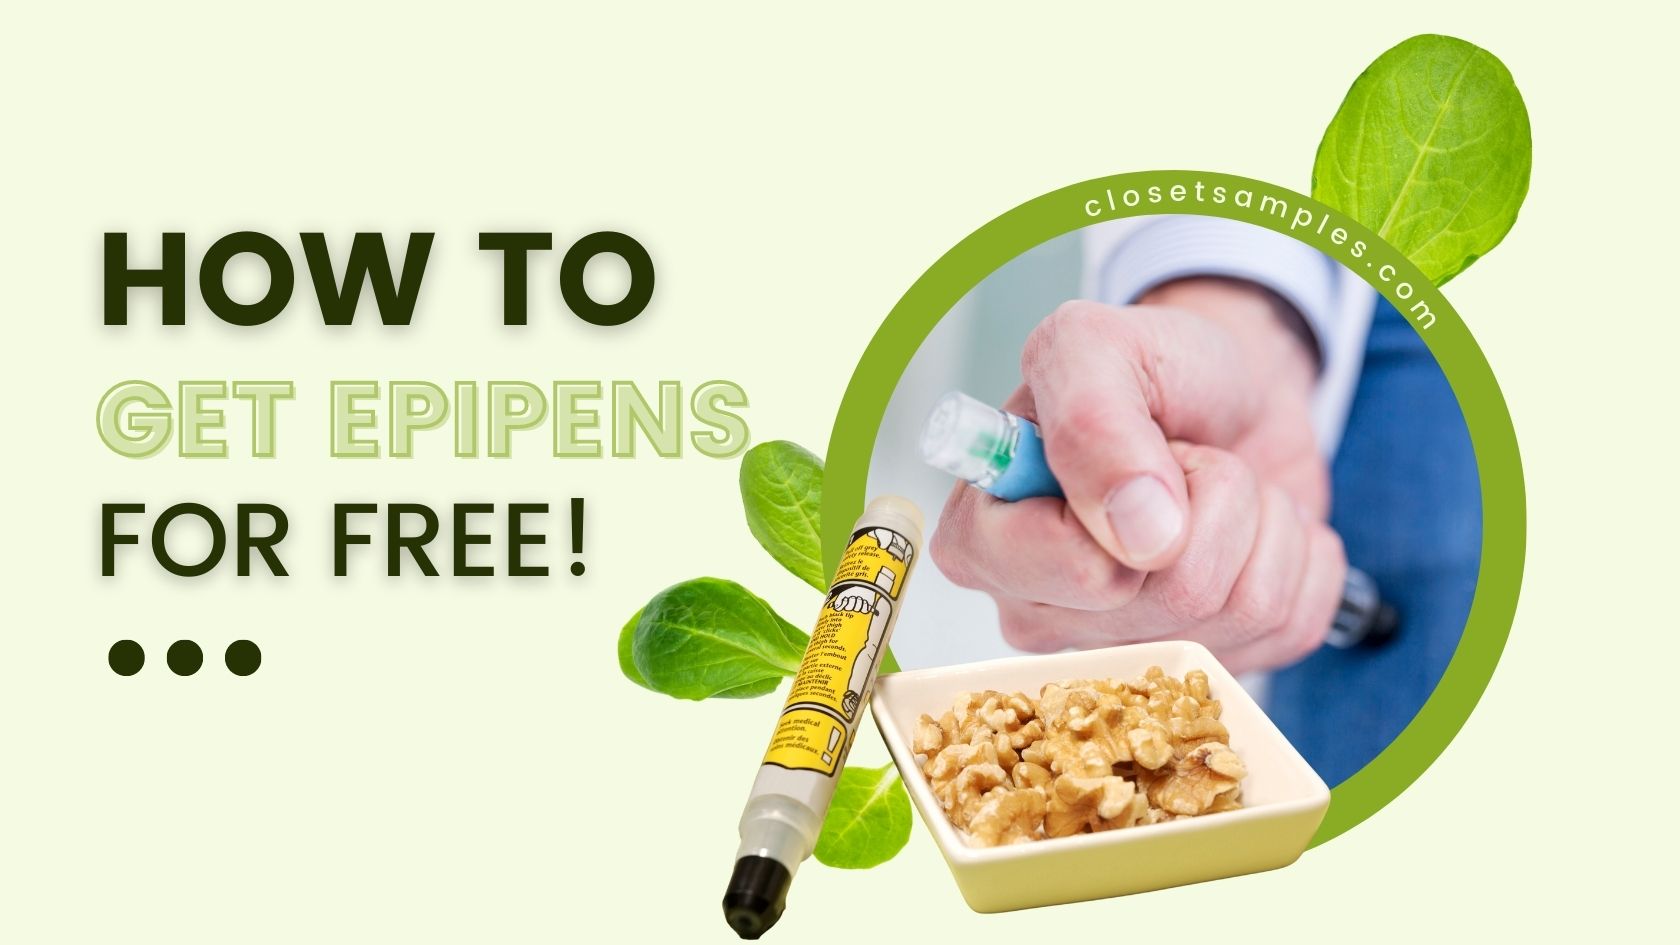 How To Get EpiPens for FREE closetsamples